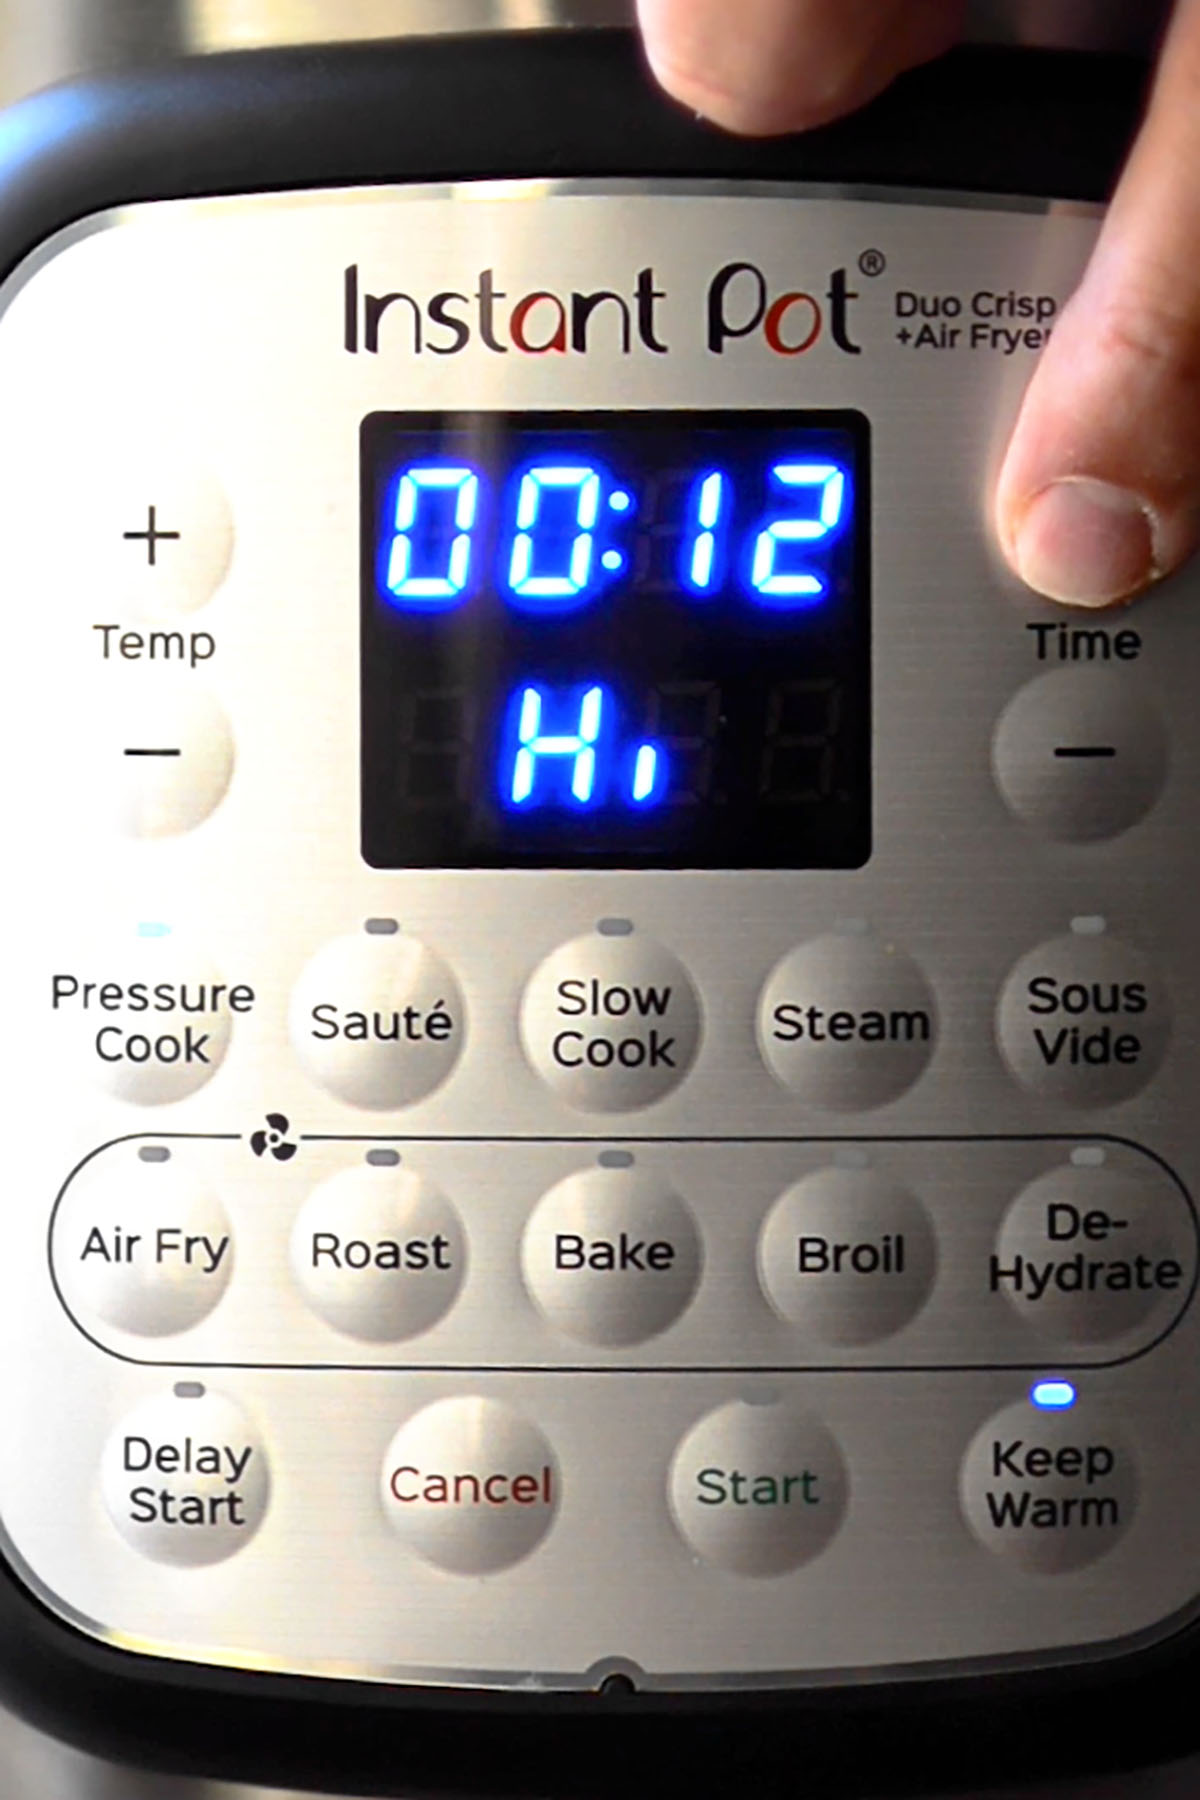 An Instant Pot set to pressure cook on high for 12 minutes.